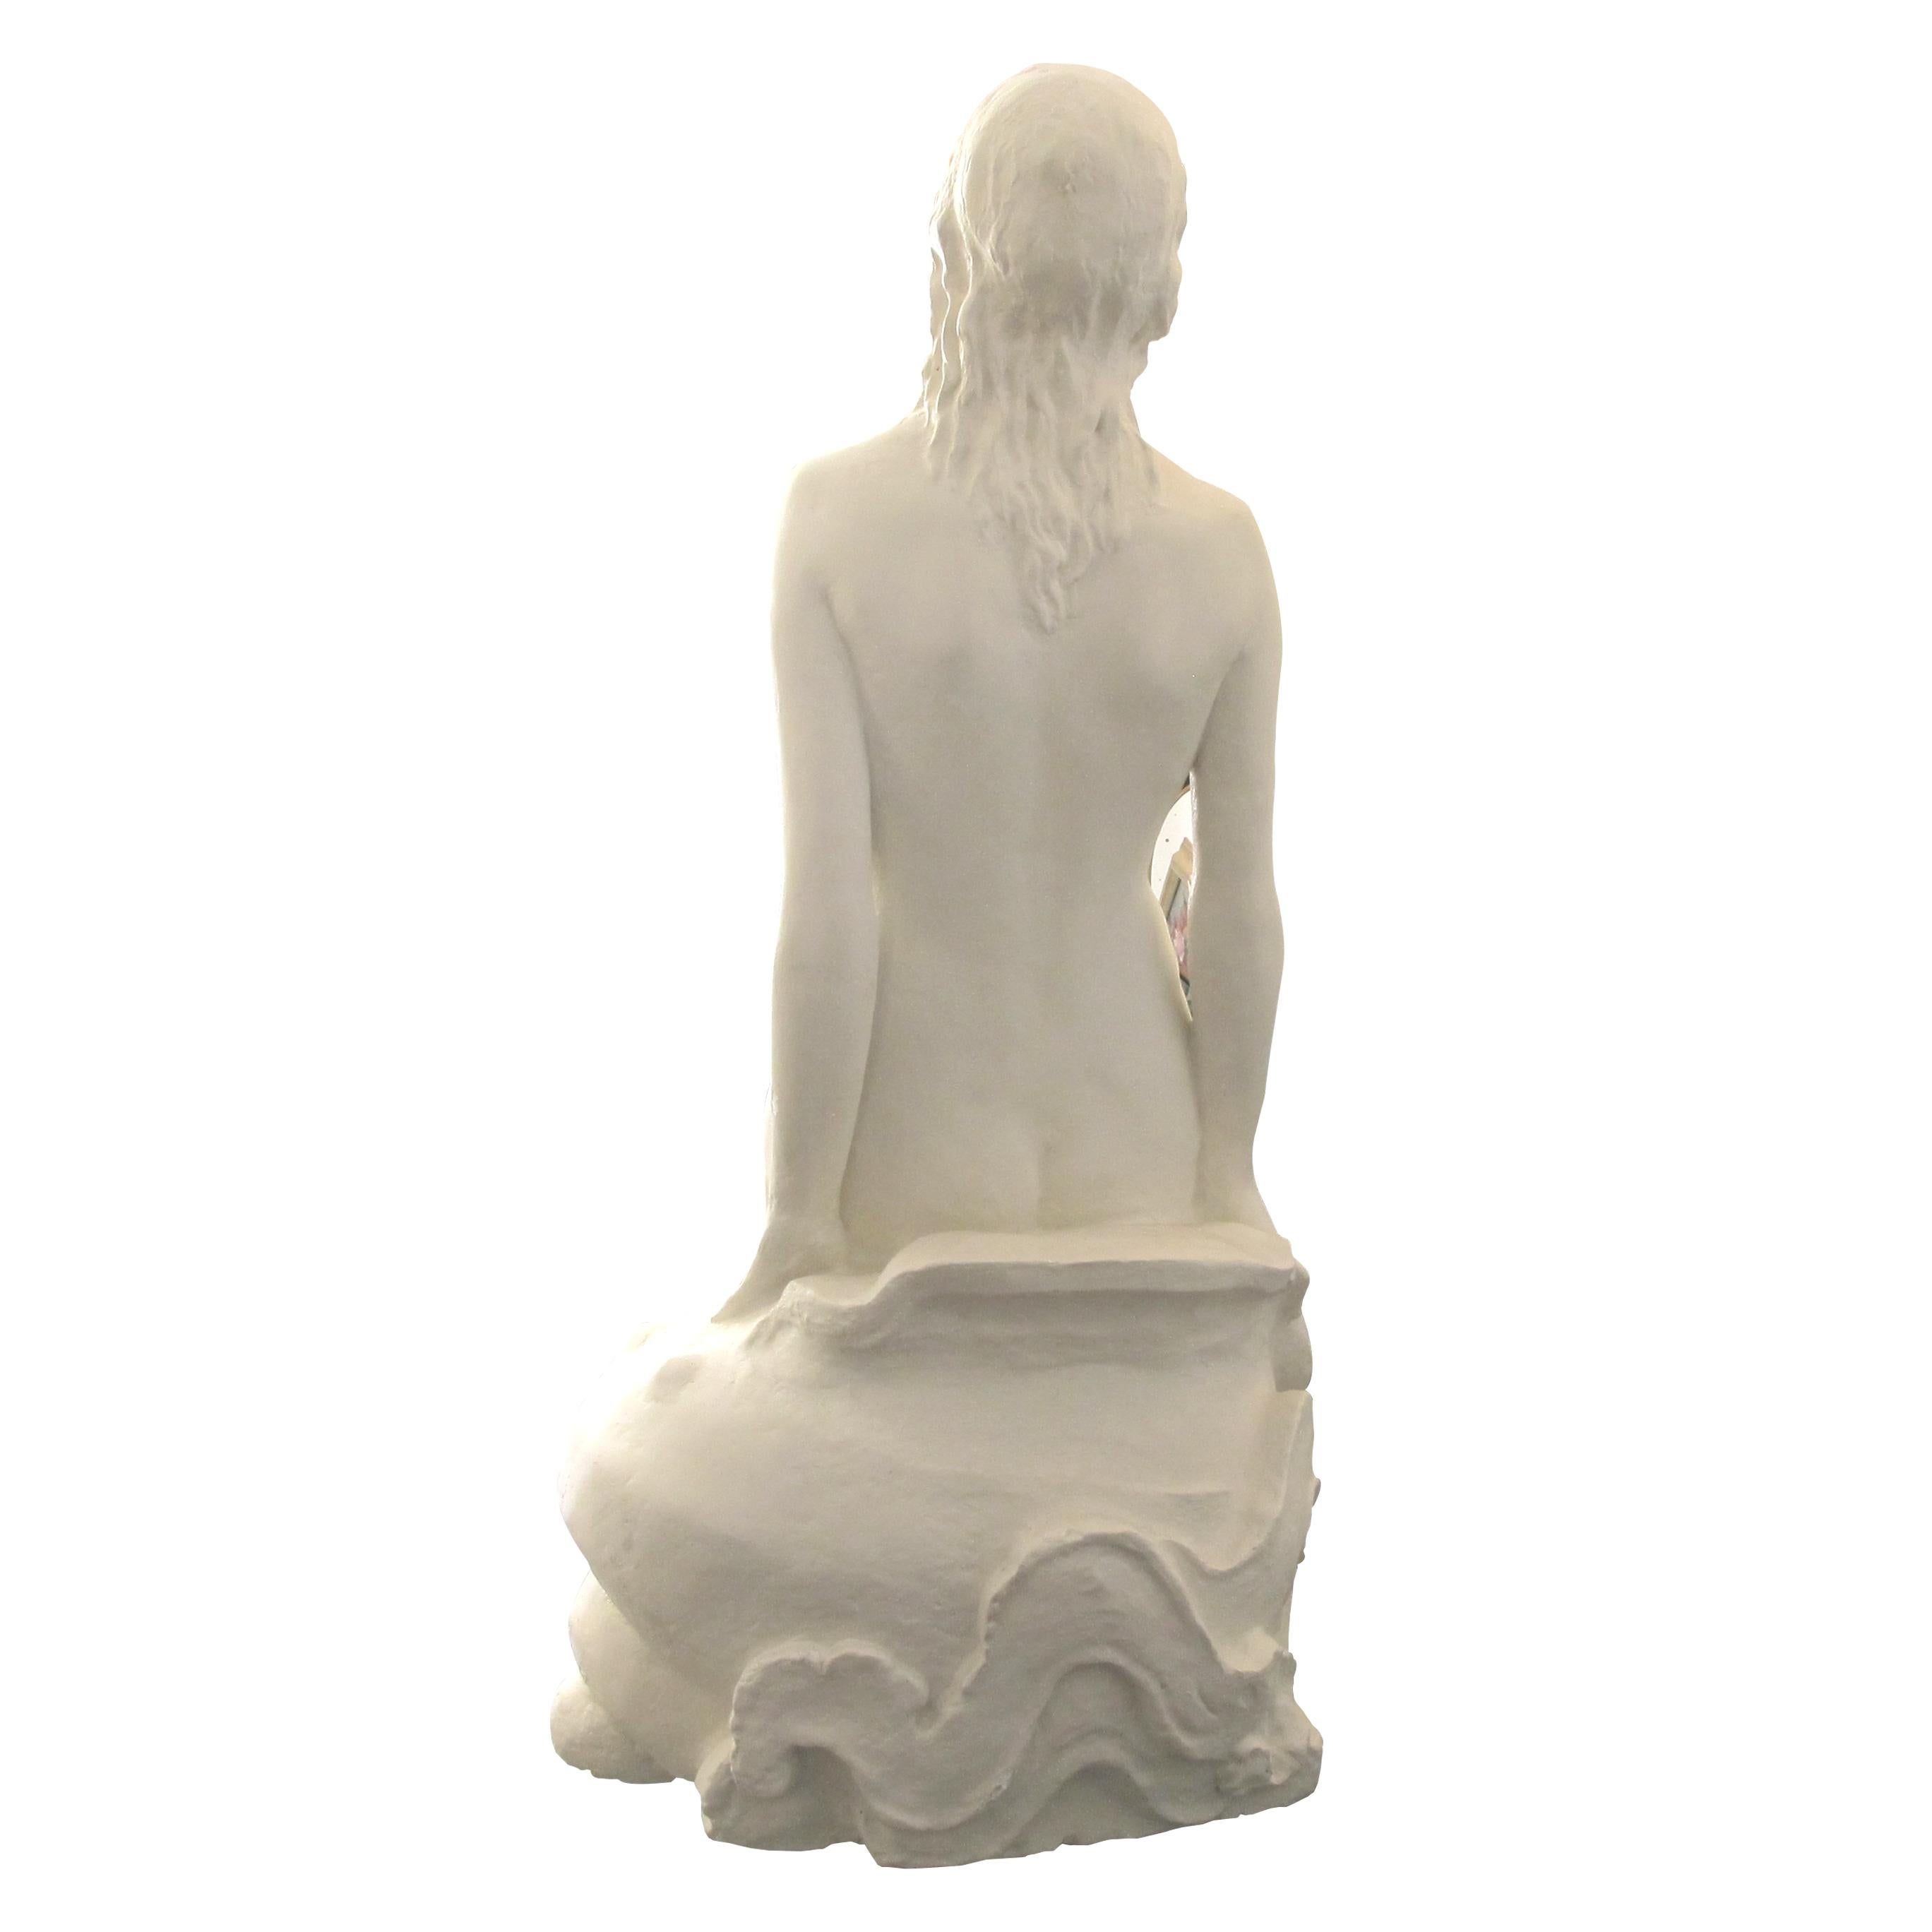 Art Deco Early 20th Century Large & Elegant English Plaster Statue of a Seated Mermaid